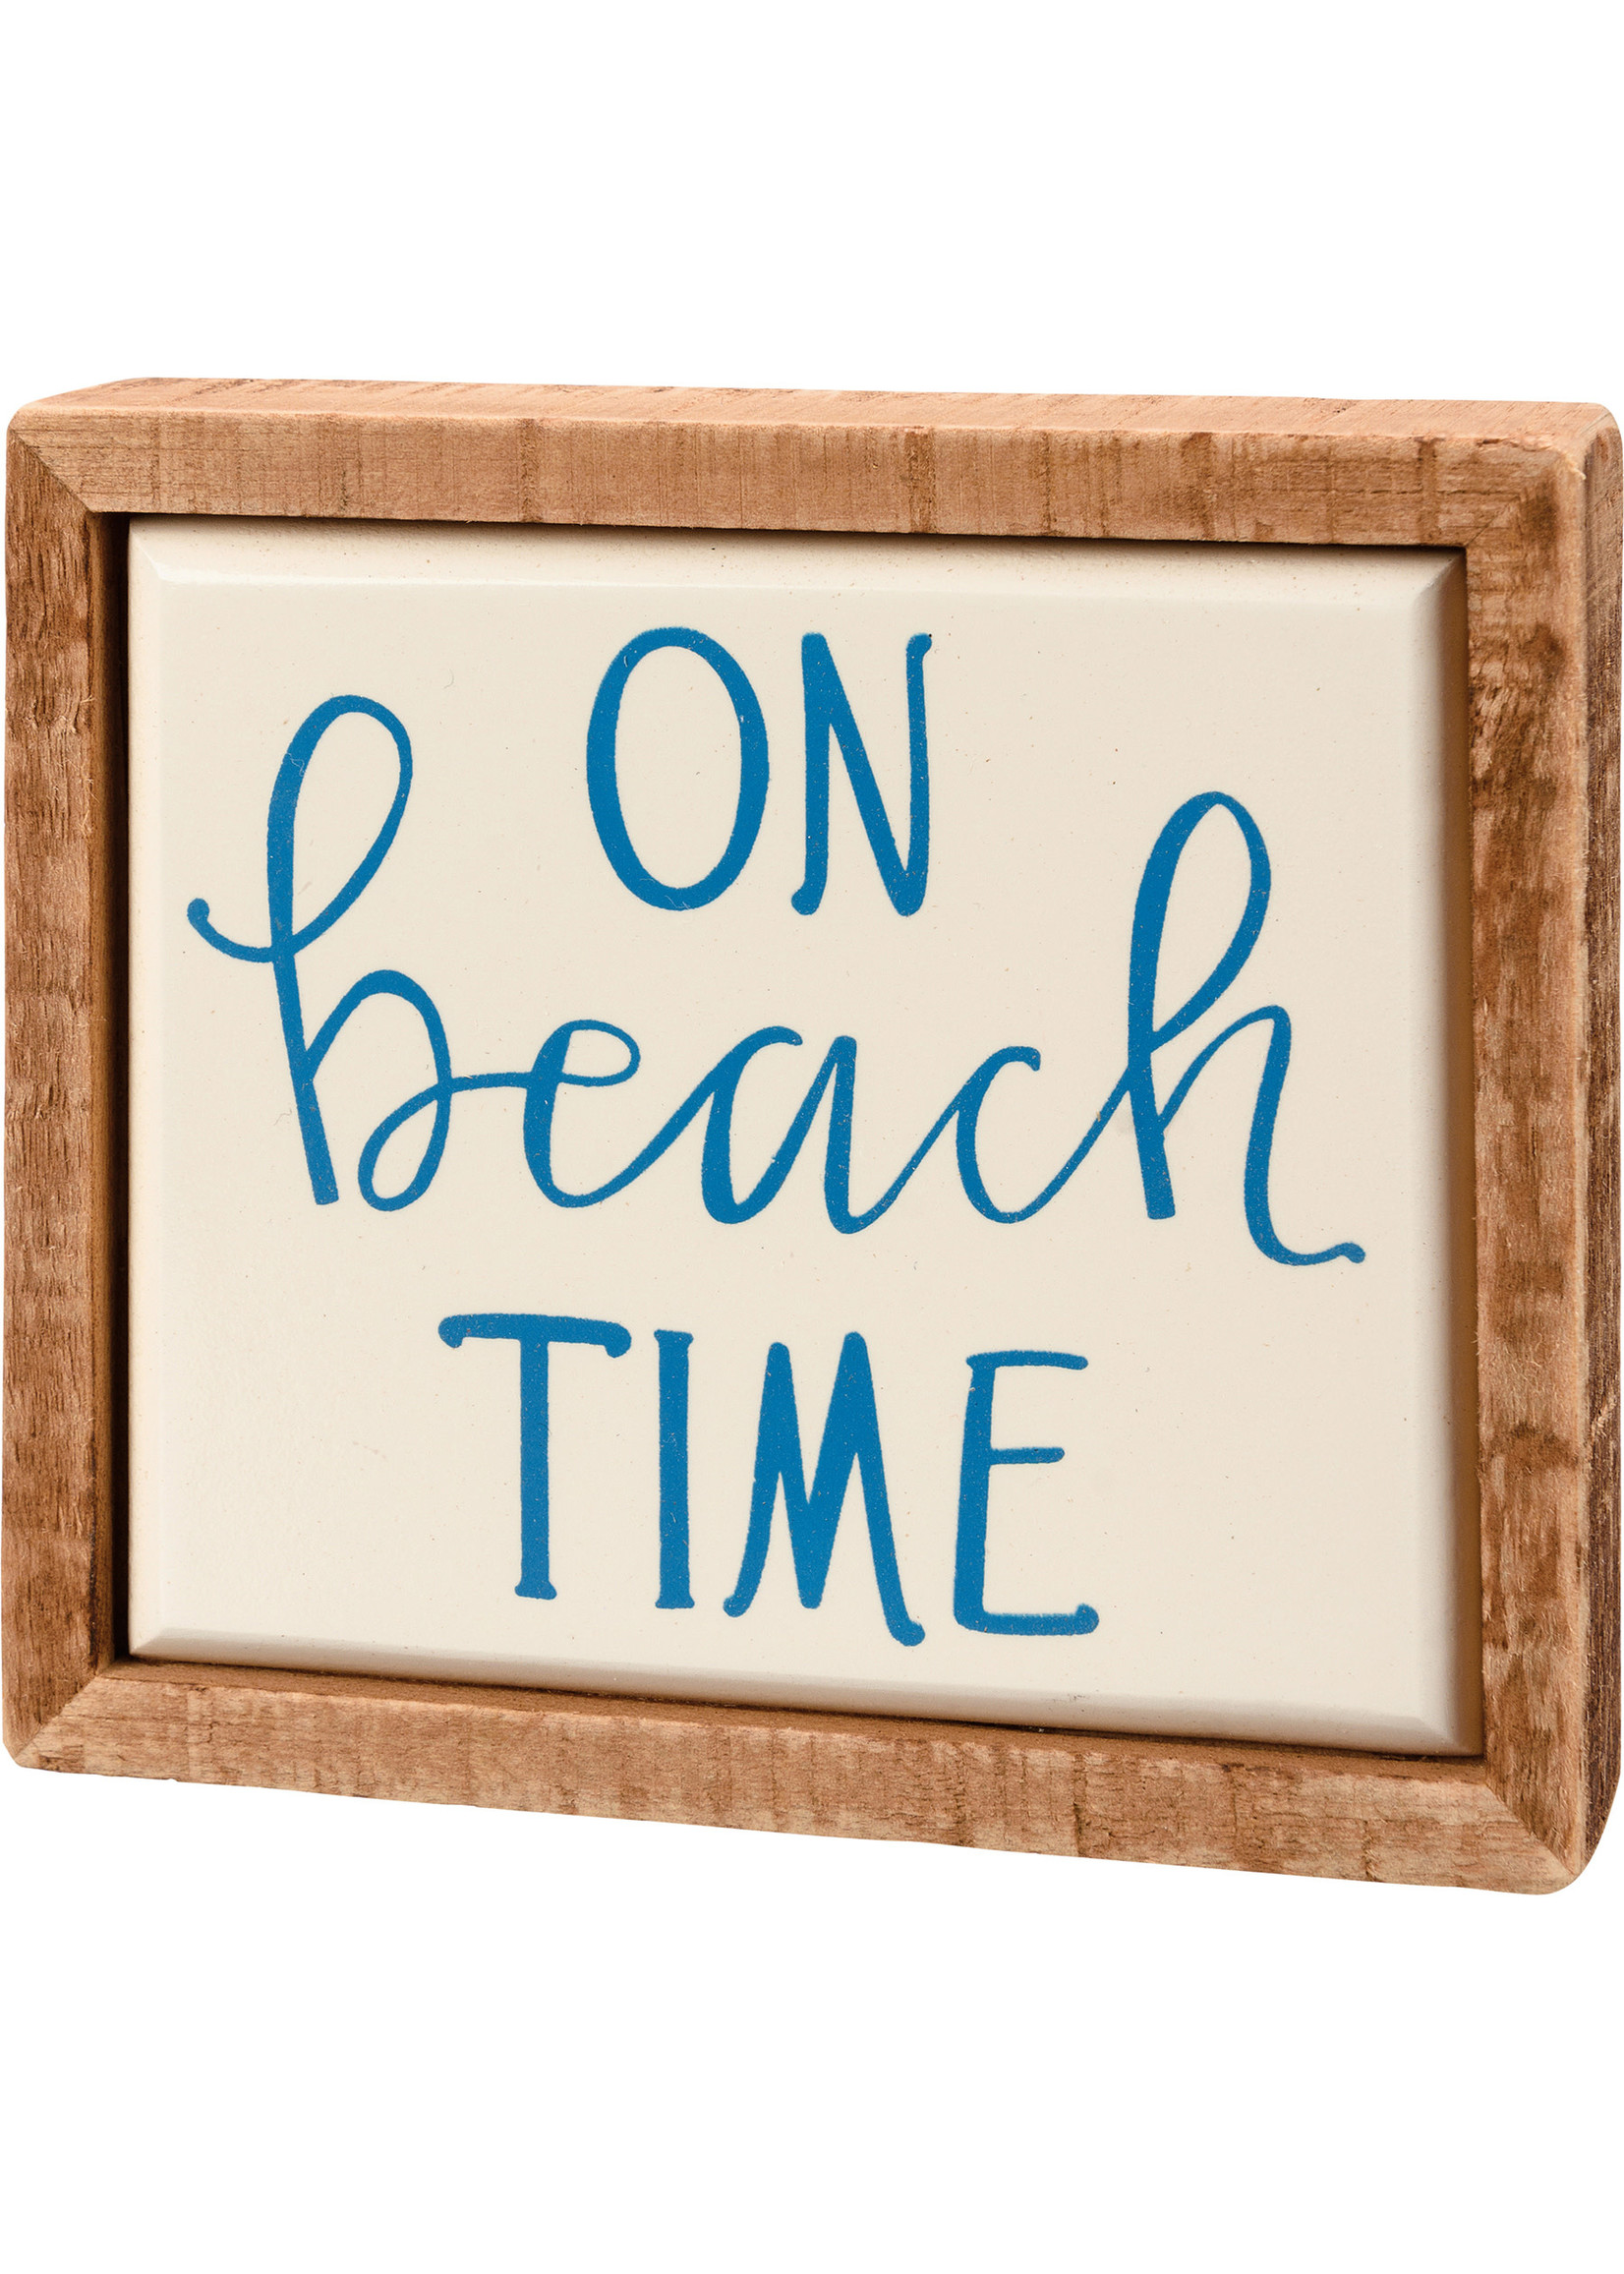 Primitives by Kathy Box Sign Mini - On Beach Time